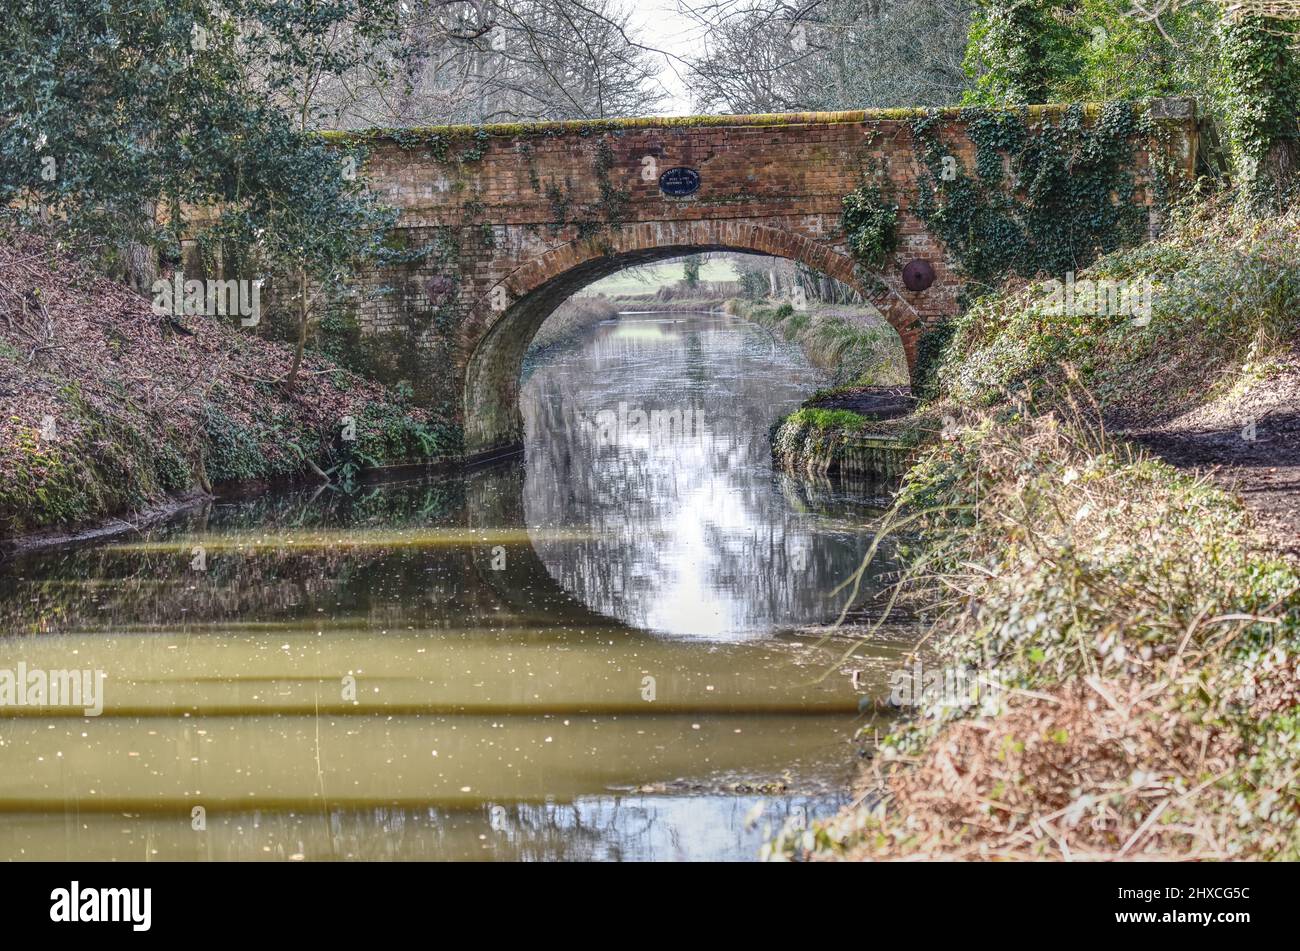 A beautiful old bridge along the Basingstoke Canal at Dogmersfield in Hampshire Stock Photo